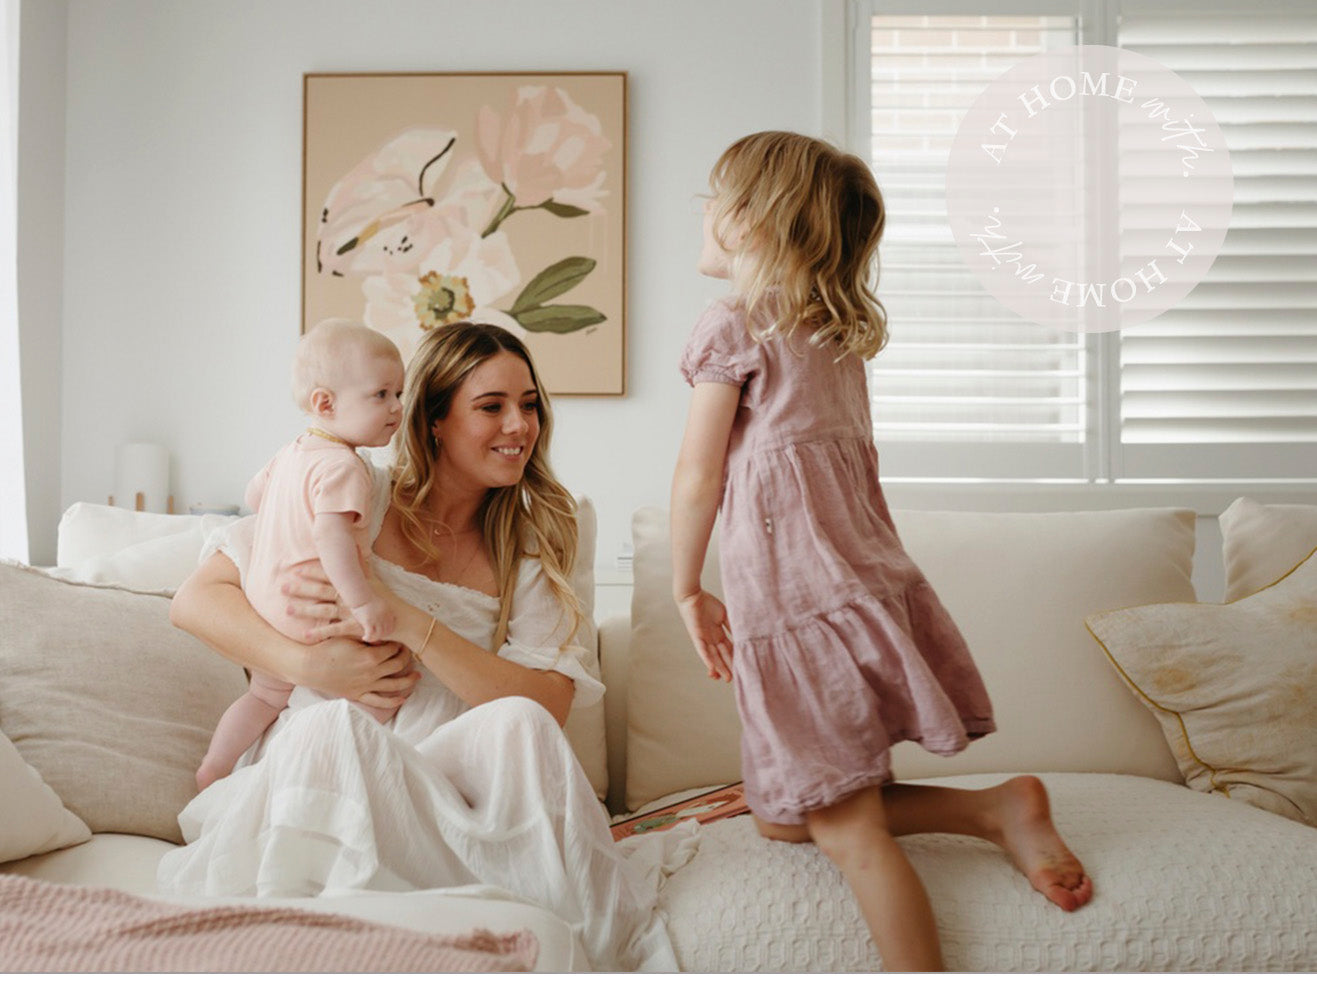 Leah and her young daughters on a couch playing